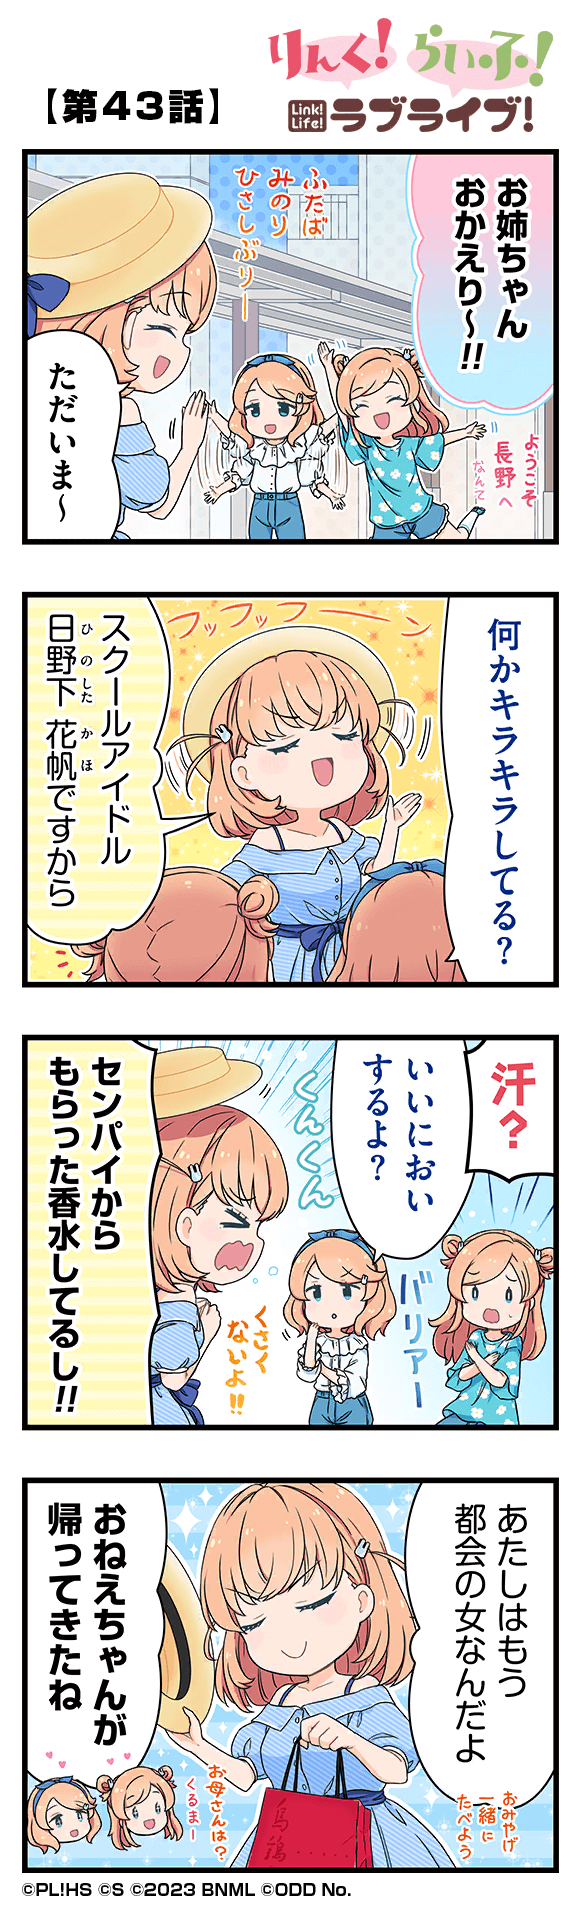 Link! Life! Love Live!「Chapter 43」